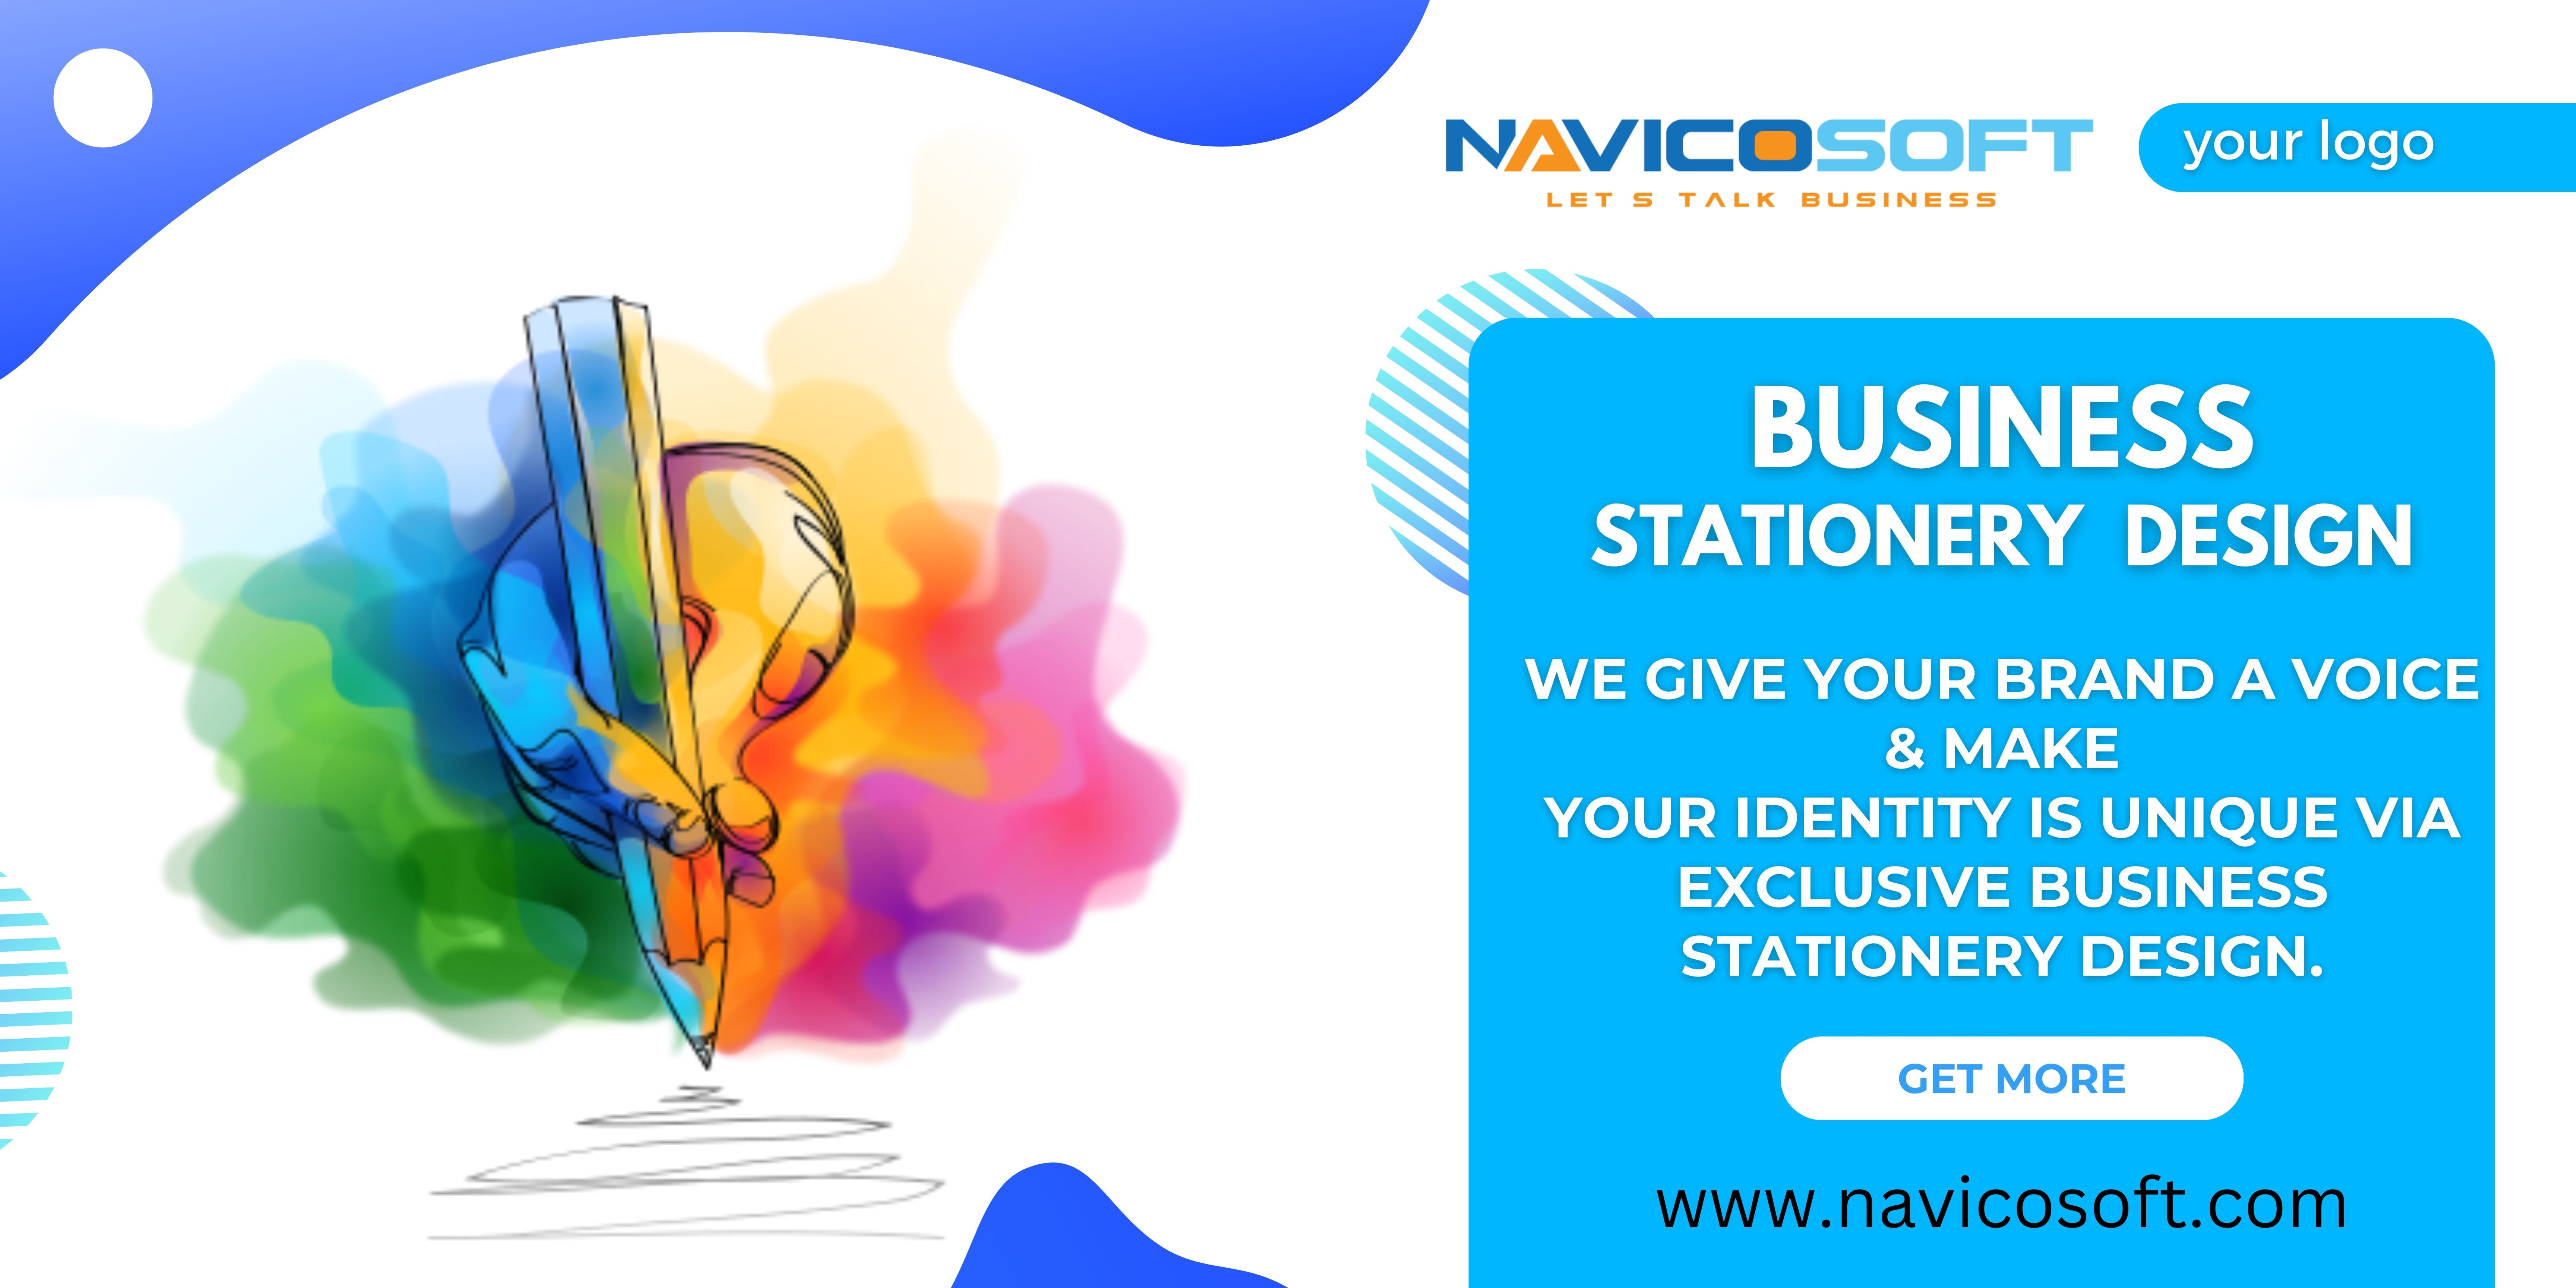 Business stationery design services Navicosoft